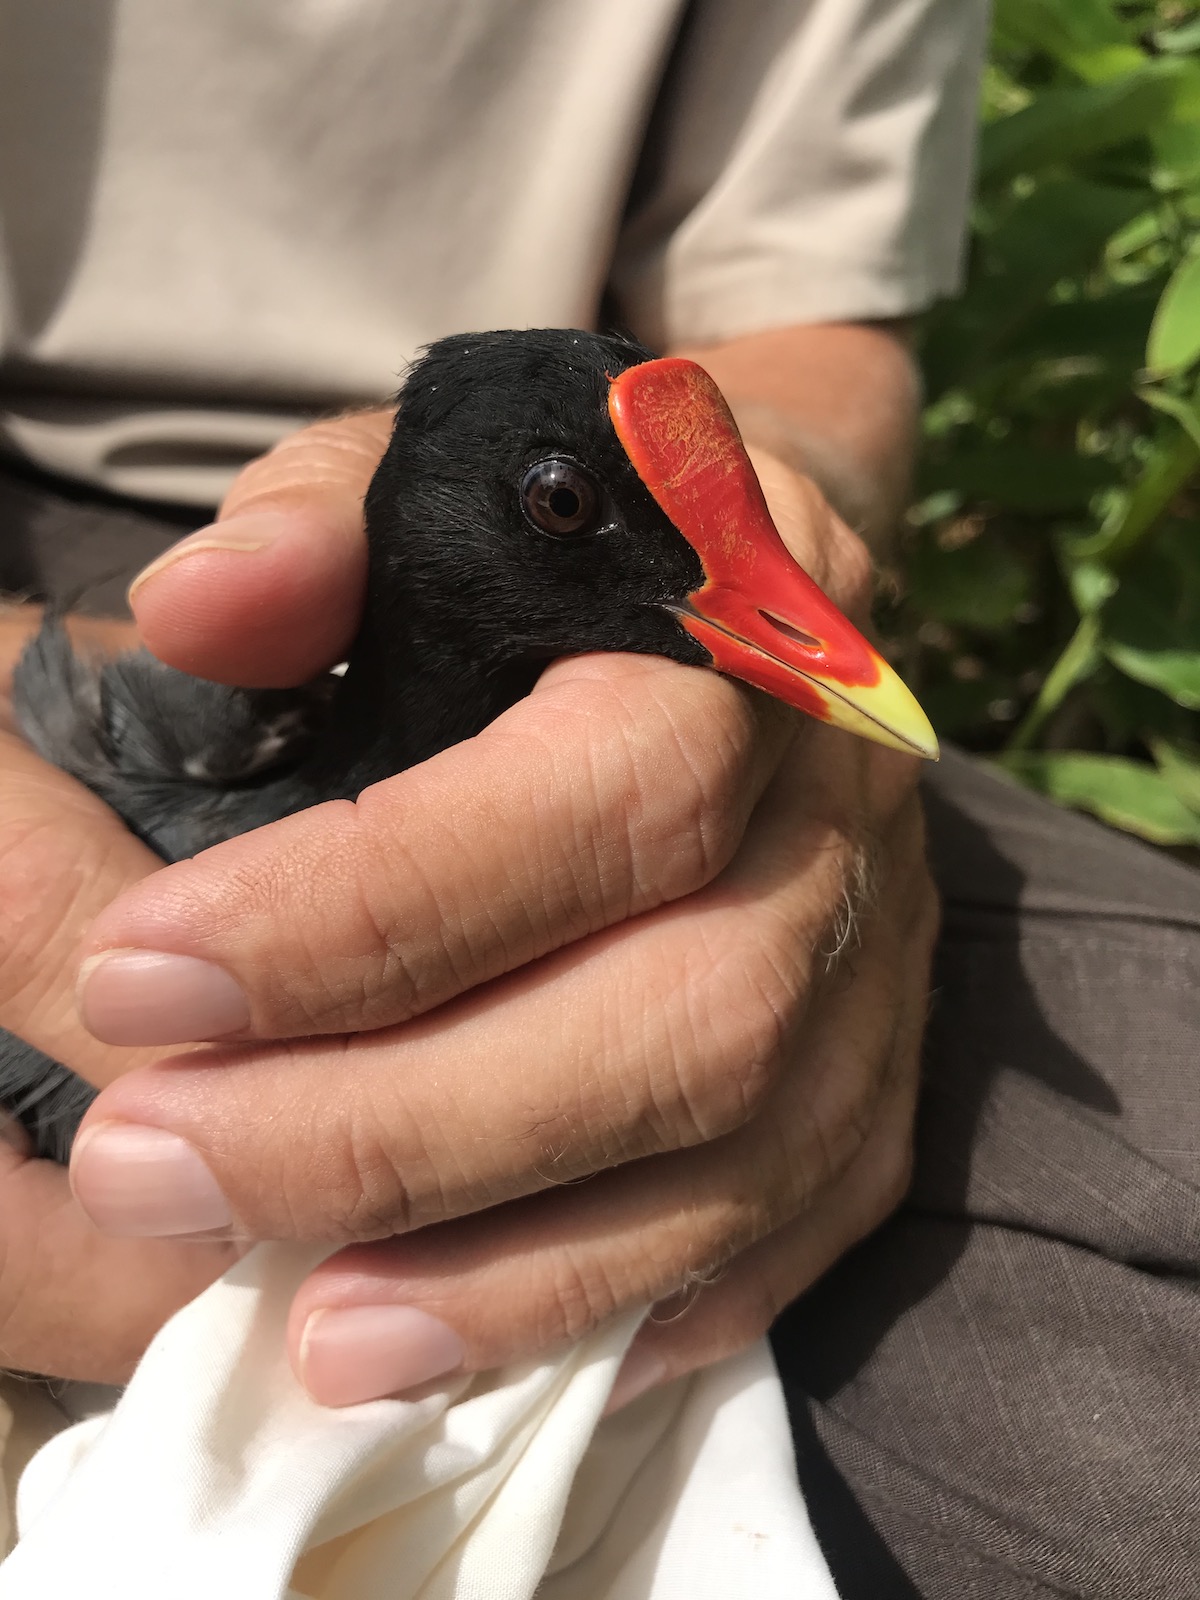 The ‘alae‘ula, or Hawaiian Common Gallinule, is an endangered species, with the global population estimated at 1,000 birds. This research project will help inform land managers about what the birds need for successful nesting.